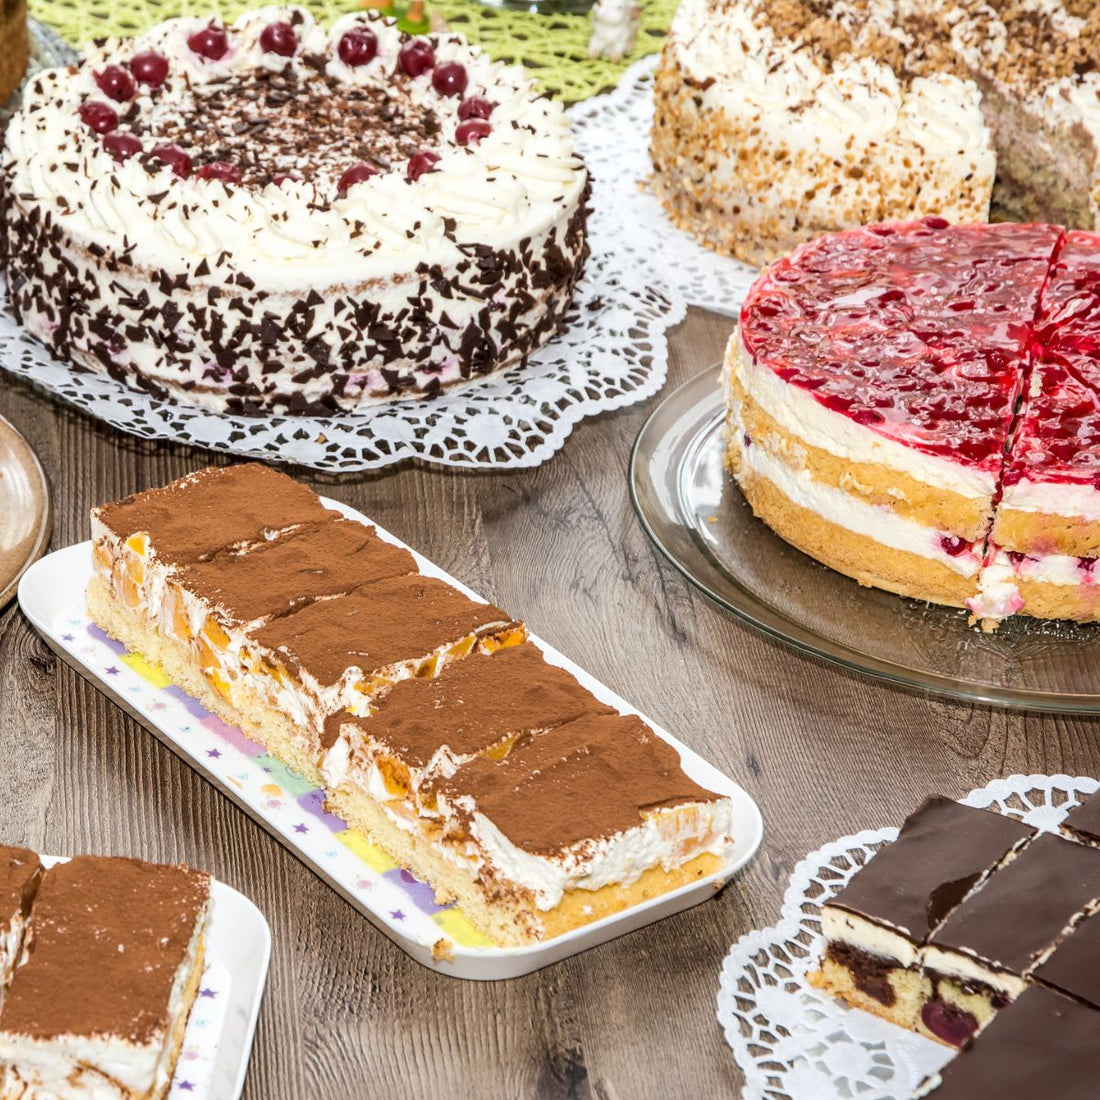 How to Make the Right Choice With Our 12 Amazing Cake Flavours!